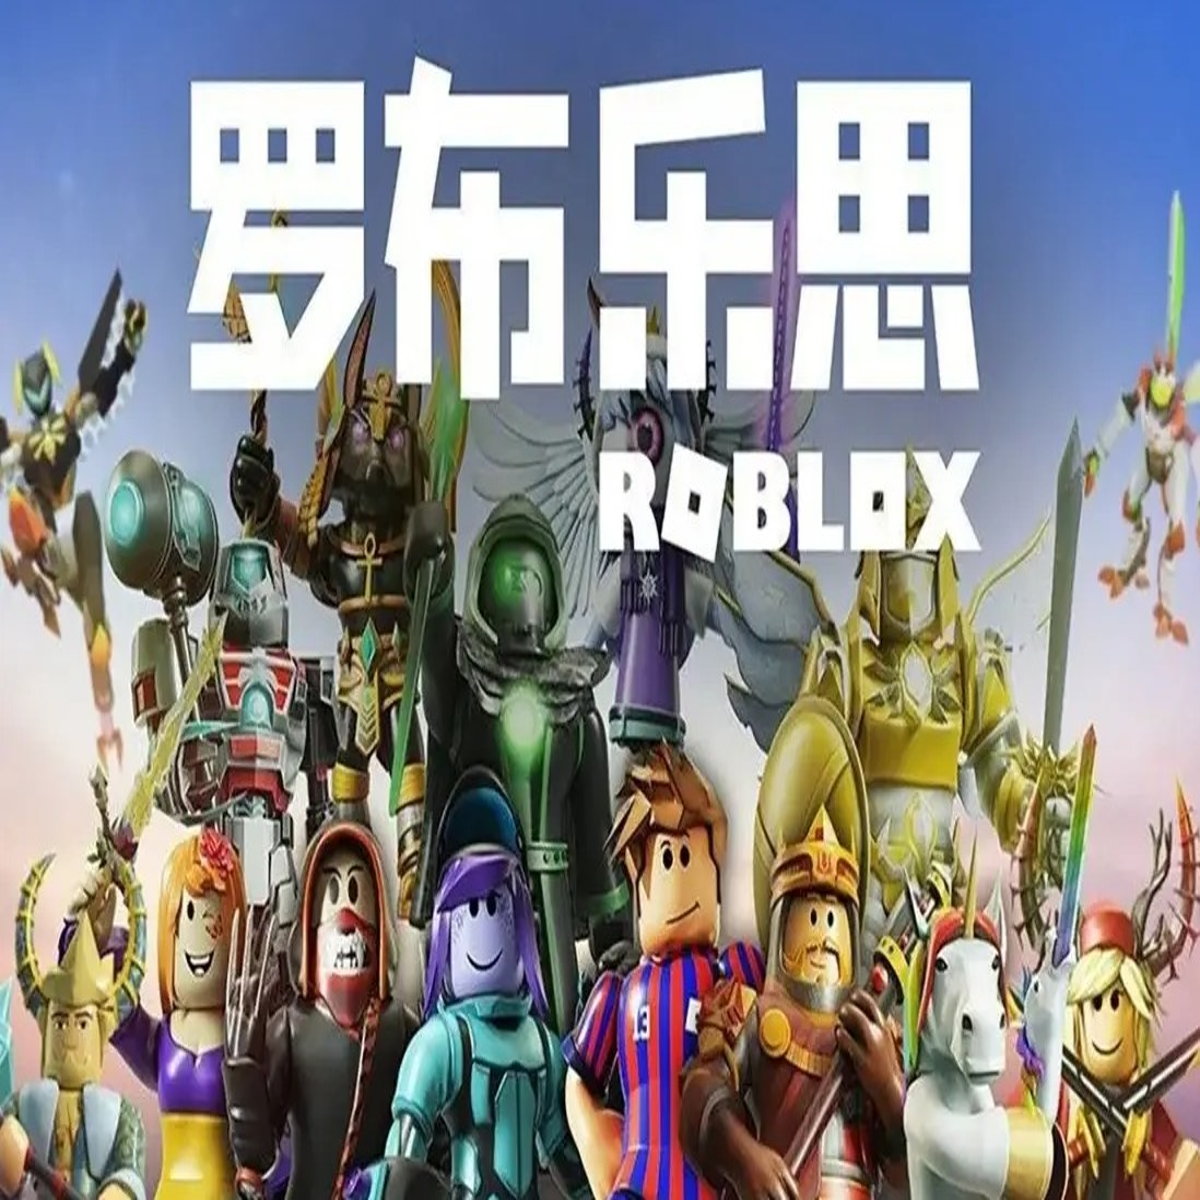 The video game platform Roblox is still down, but the company says